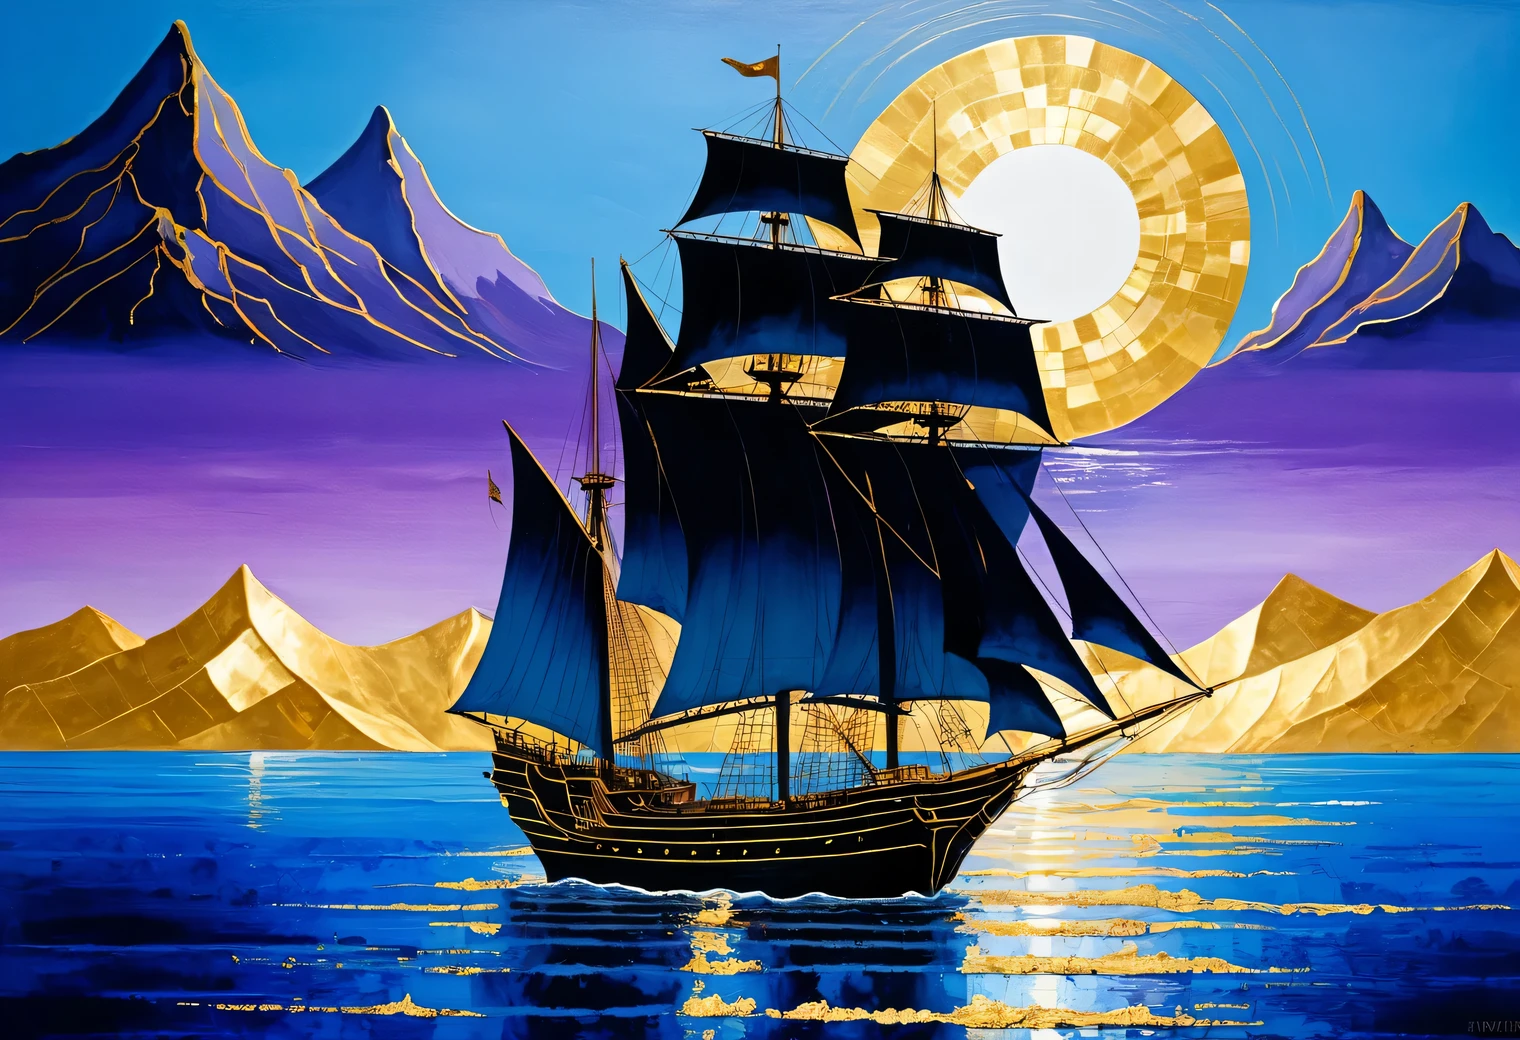 Seascape, combination of black and gold leaf, purple blue background, painting on a blue background, Golden sun in a light blue sky, ship with golden sails on a blue sea, high resolution, surrealismLandscapes of night megalopolises, a combination of black and gold leaf, purple background, painting on a purple background, golden lights of the night megalopolis, high definition, surrealism